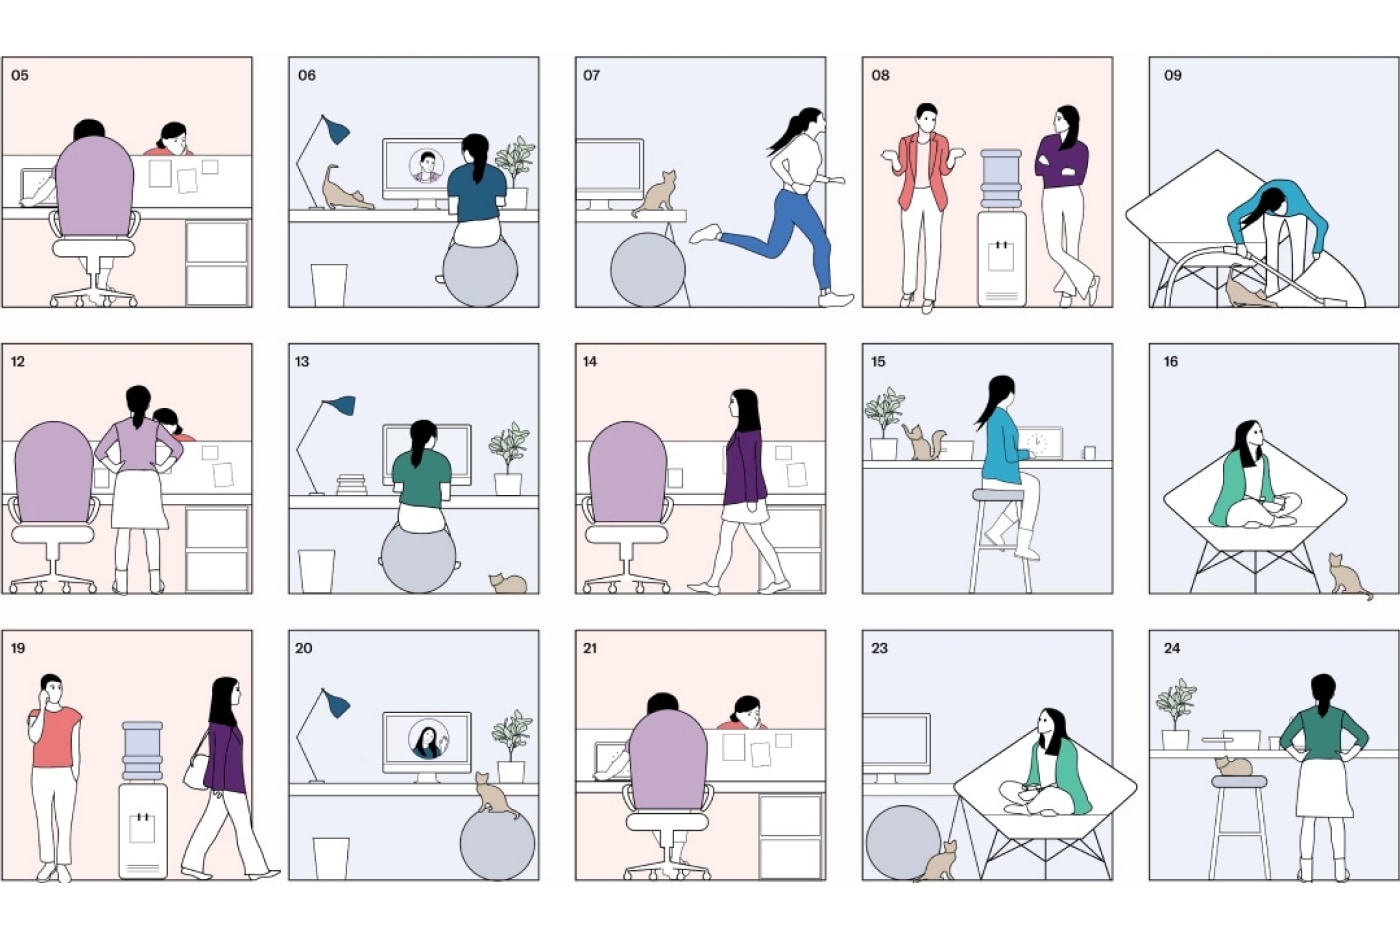 A calendar shows a person working in a different work setting for each day